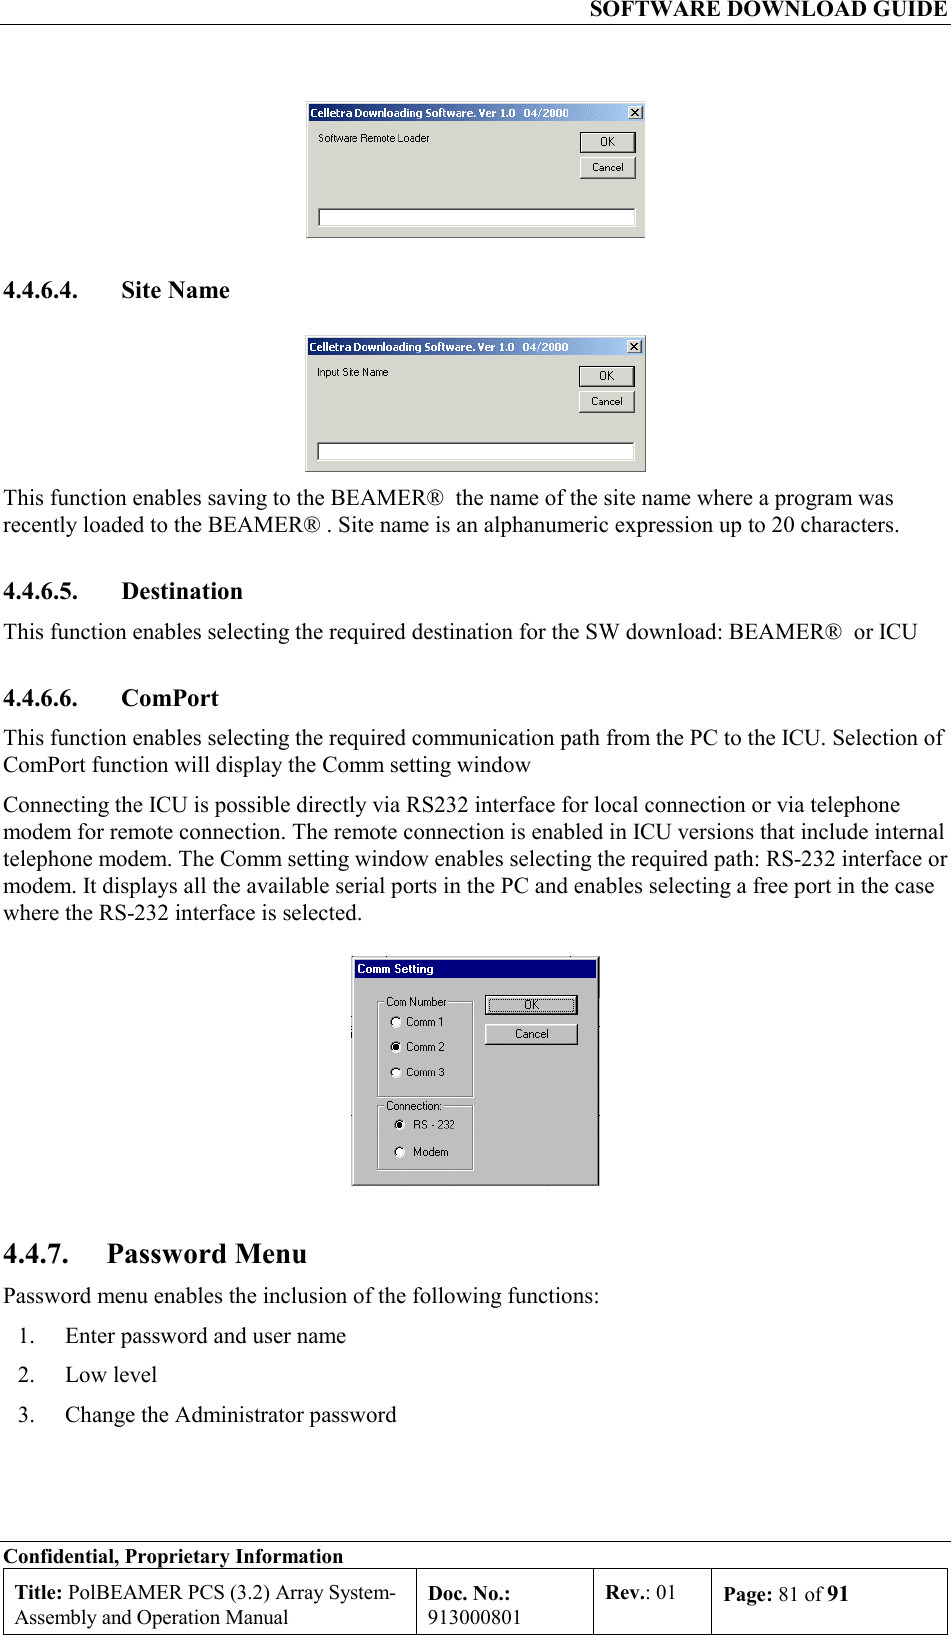   SOFTWARE DOWNLOAD GUIDE Confidential, Proprietary Information Title: PolBEAMER PCS (3.2) Array System- Assembly and Operation Manual Doc. No.: 913000801 Rev.: 01  Page: 81 of 91   4.4.6.4. Site Name  This function enables saving to the BEAMER®  the name of the site name where a program was recently loaded to the BEAMER® . Site name is an alphanumeric expression up to 20 characters. 4.4.6.5. Destination This function enables selecting the required destination for the SW download: BEAMER®  or ICU 4.4.6.6. ComPort This function enables selecting the required communication path from the PC to the ICU. Selection of ComPort function will display the Comm setting window Connecting the ICU is possible directly via RS232 interface for local connection or via telephone modem for remote connection. The remote connection is enabled in ICU versions that include internal telephone modem. The Comm setting window enables selecting the required path: RS-232 interface or modem. It displays all the available serial ports in the PC and enables selecting a free port in the case where the RS-232 interface is selected.  4.4.7. Password Menu Password menu enables the inclusion of the following functions: 1.  Enter password and user name  2. Low level 3.  Change the Administrator password 